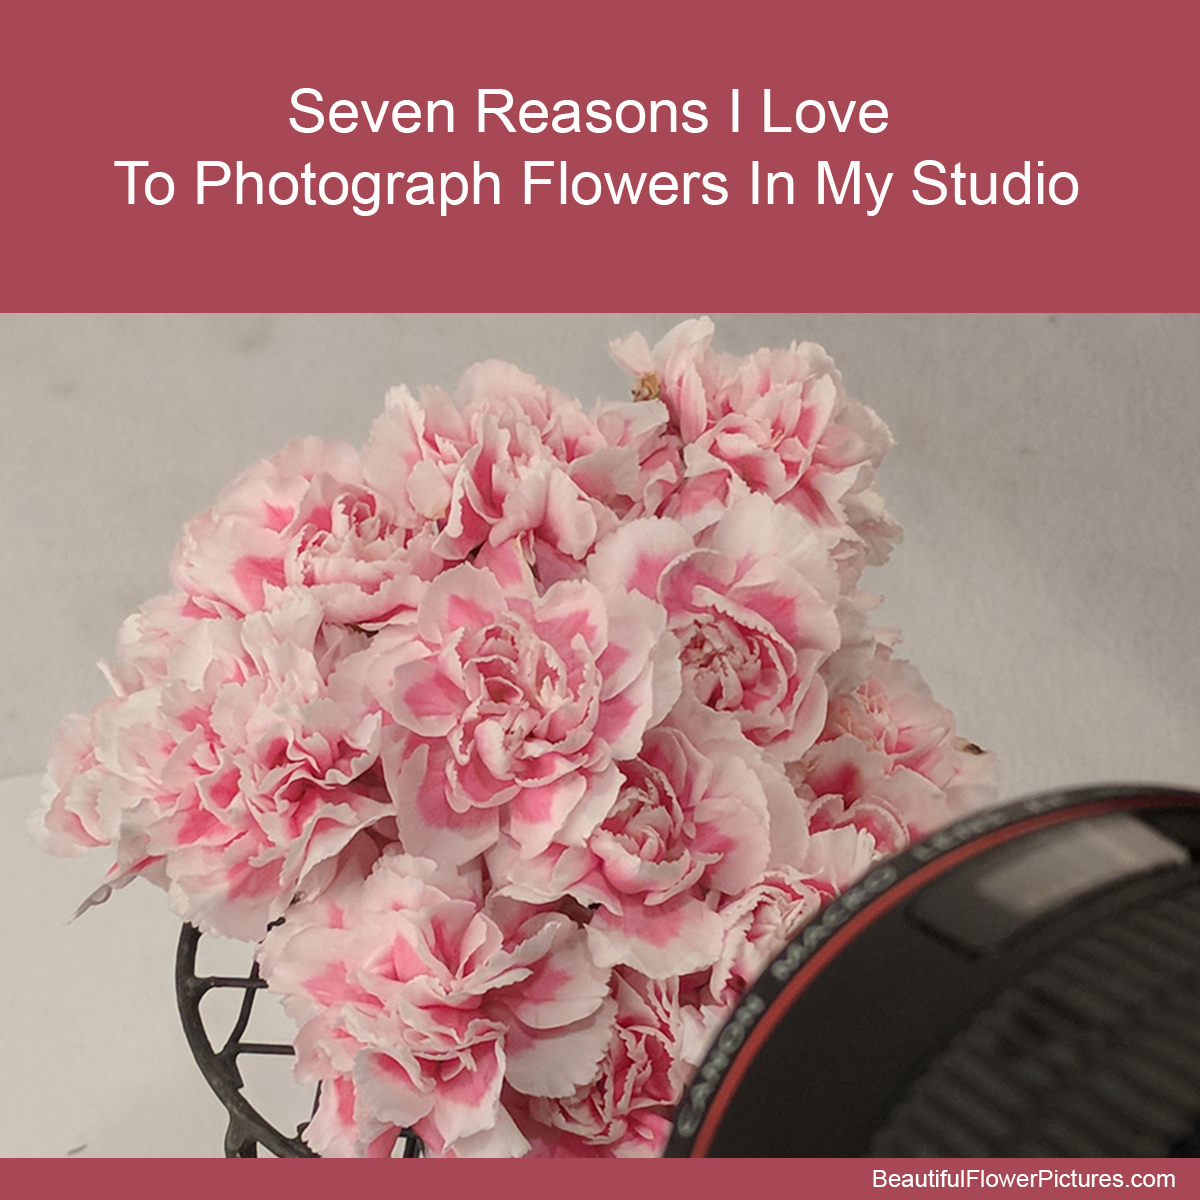 Seven Reasons I Love Photographing Flowers in my Studio